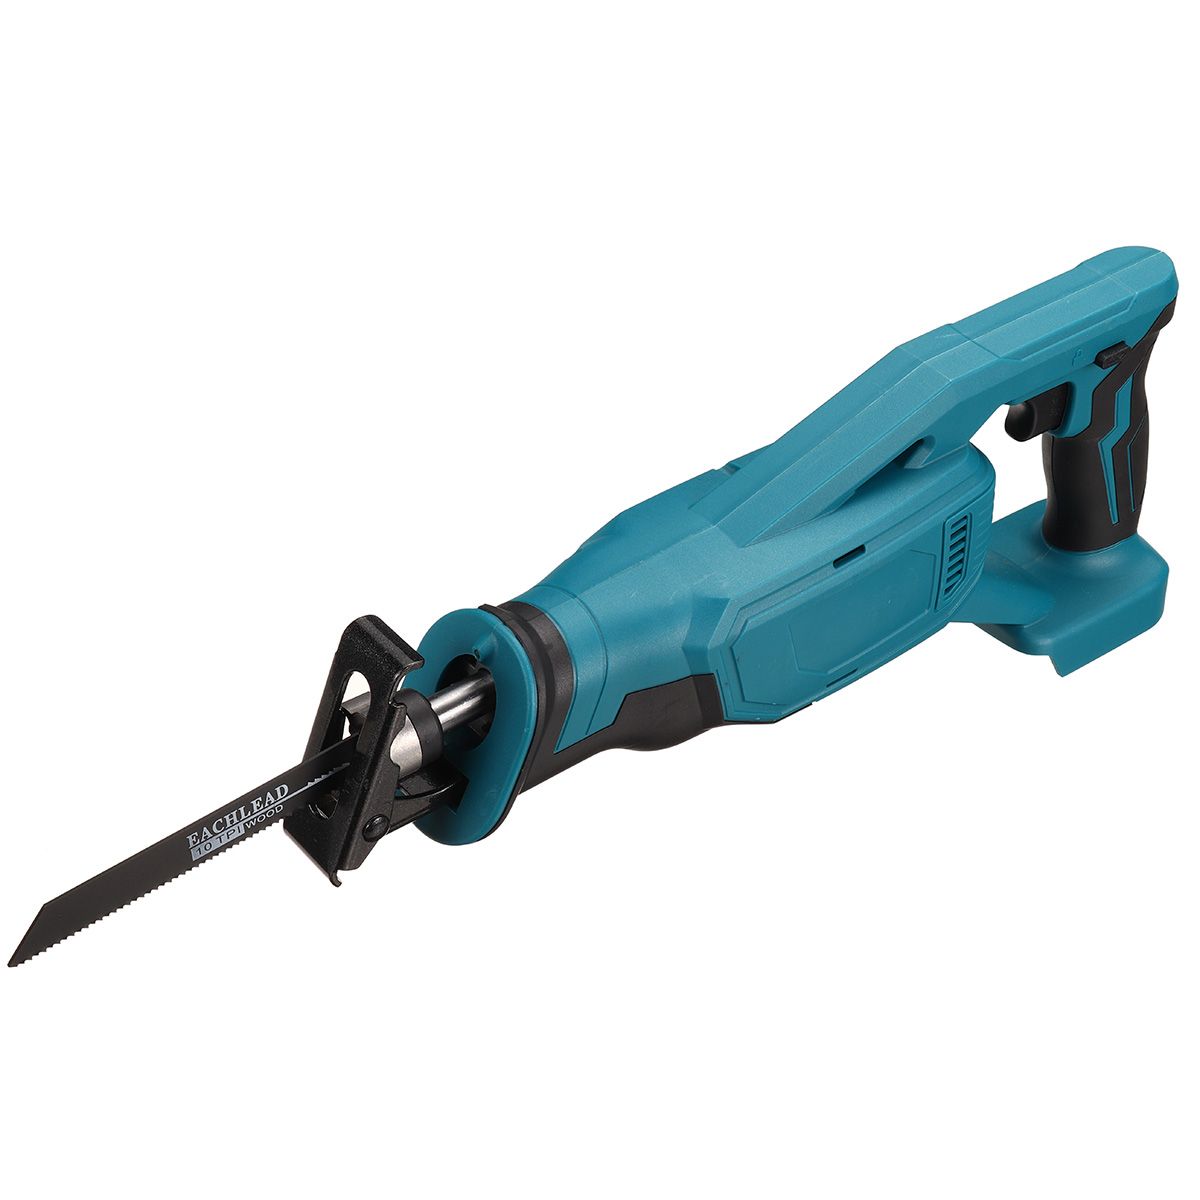 18V-Blue-Electric-Reciprocating-Saw-Variable-Speed-Cordless-Wood-Metal-Cutting-Power-Tools-Set-1716396